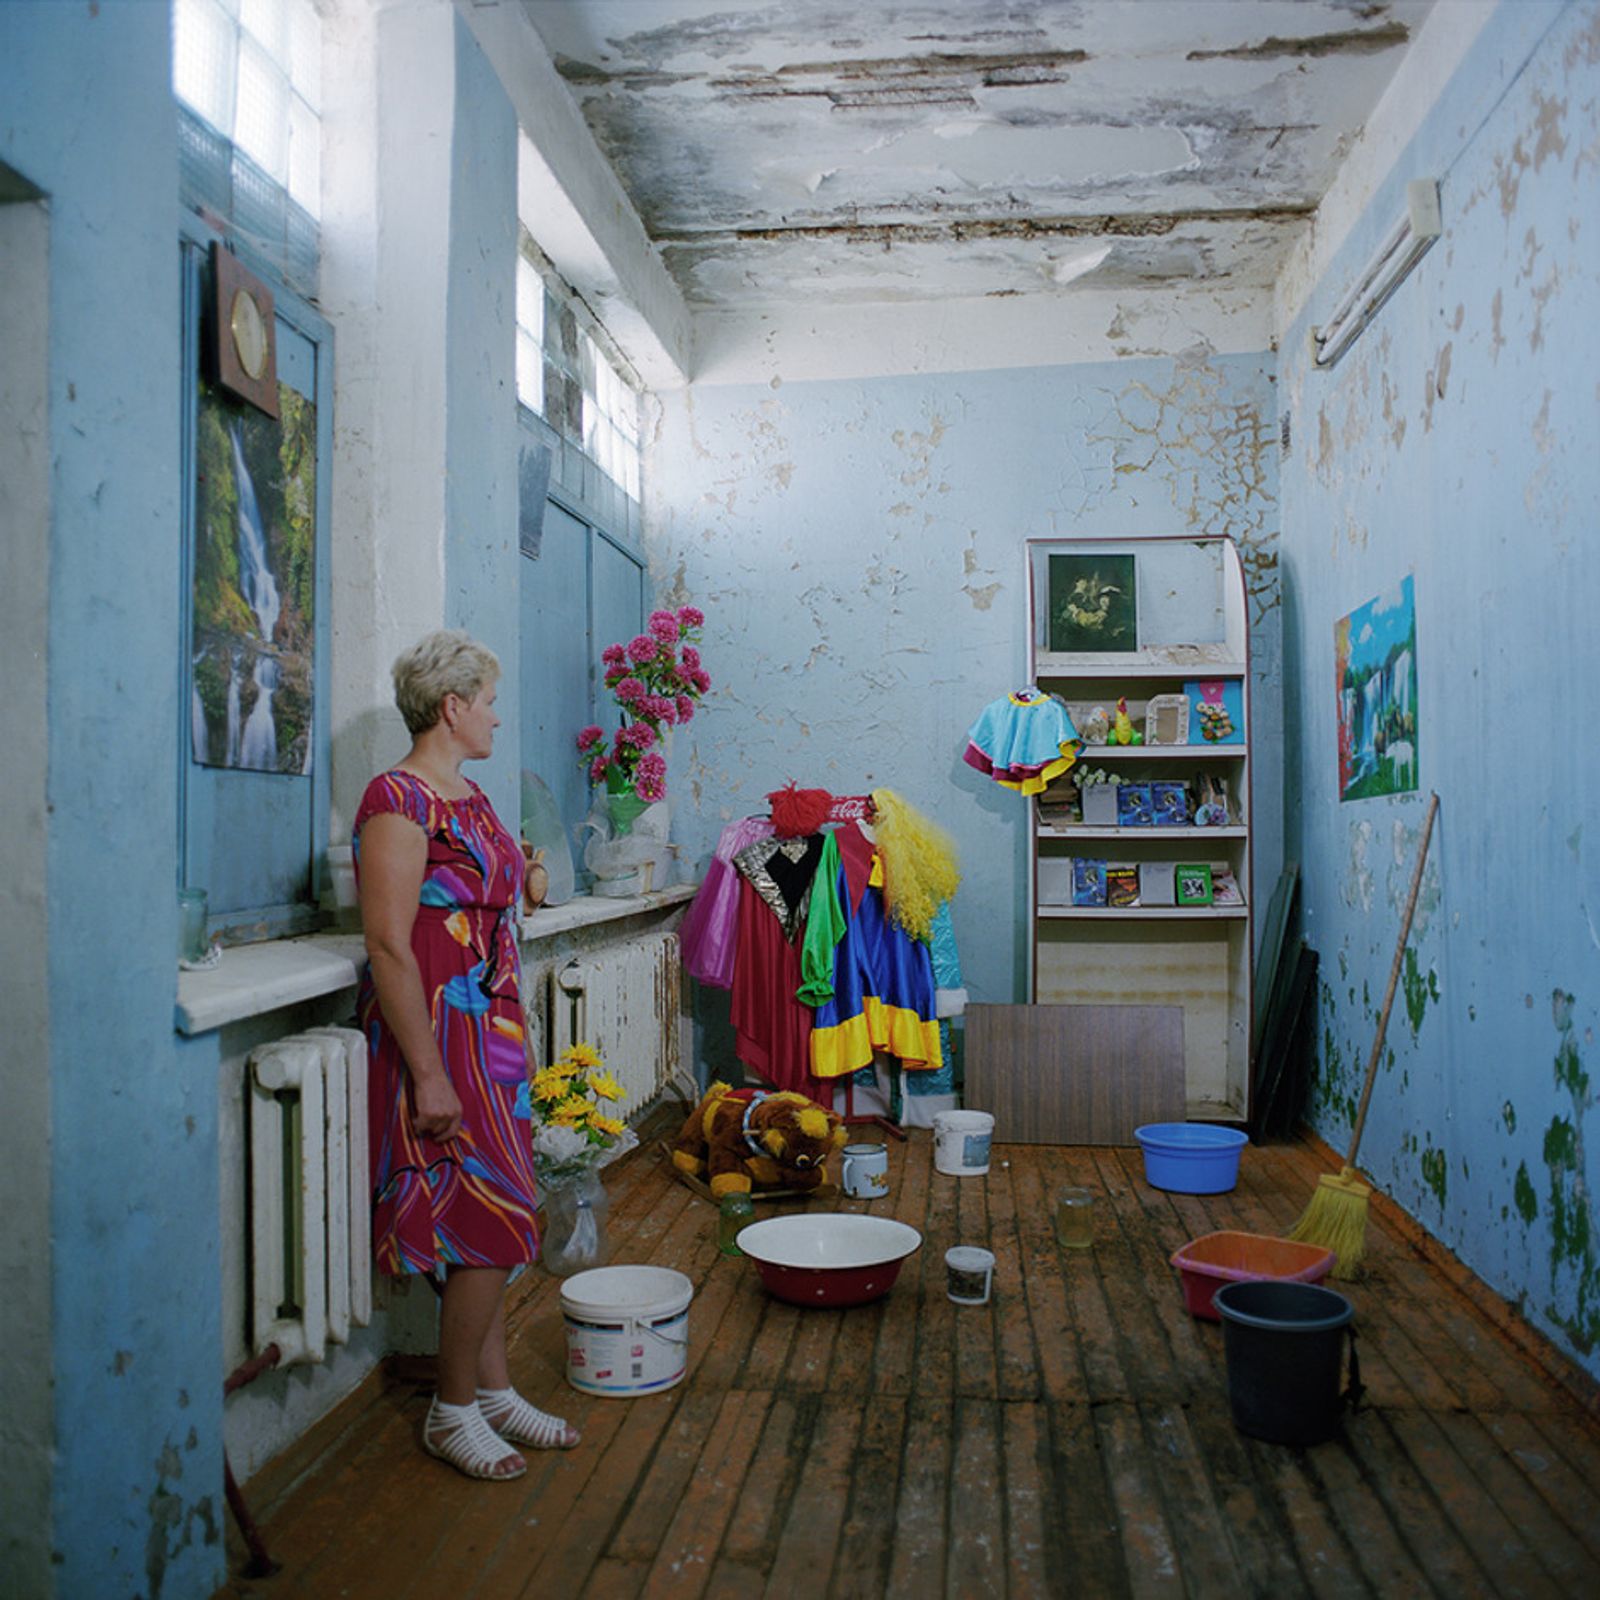 © Dmitry Lookianov - Image from the House of Culture photography project